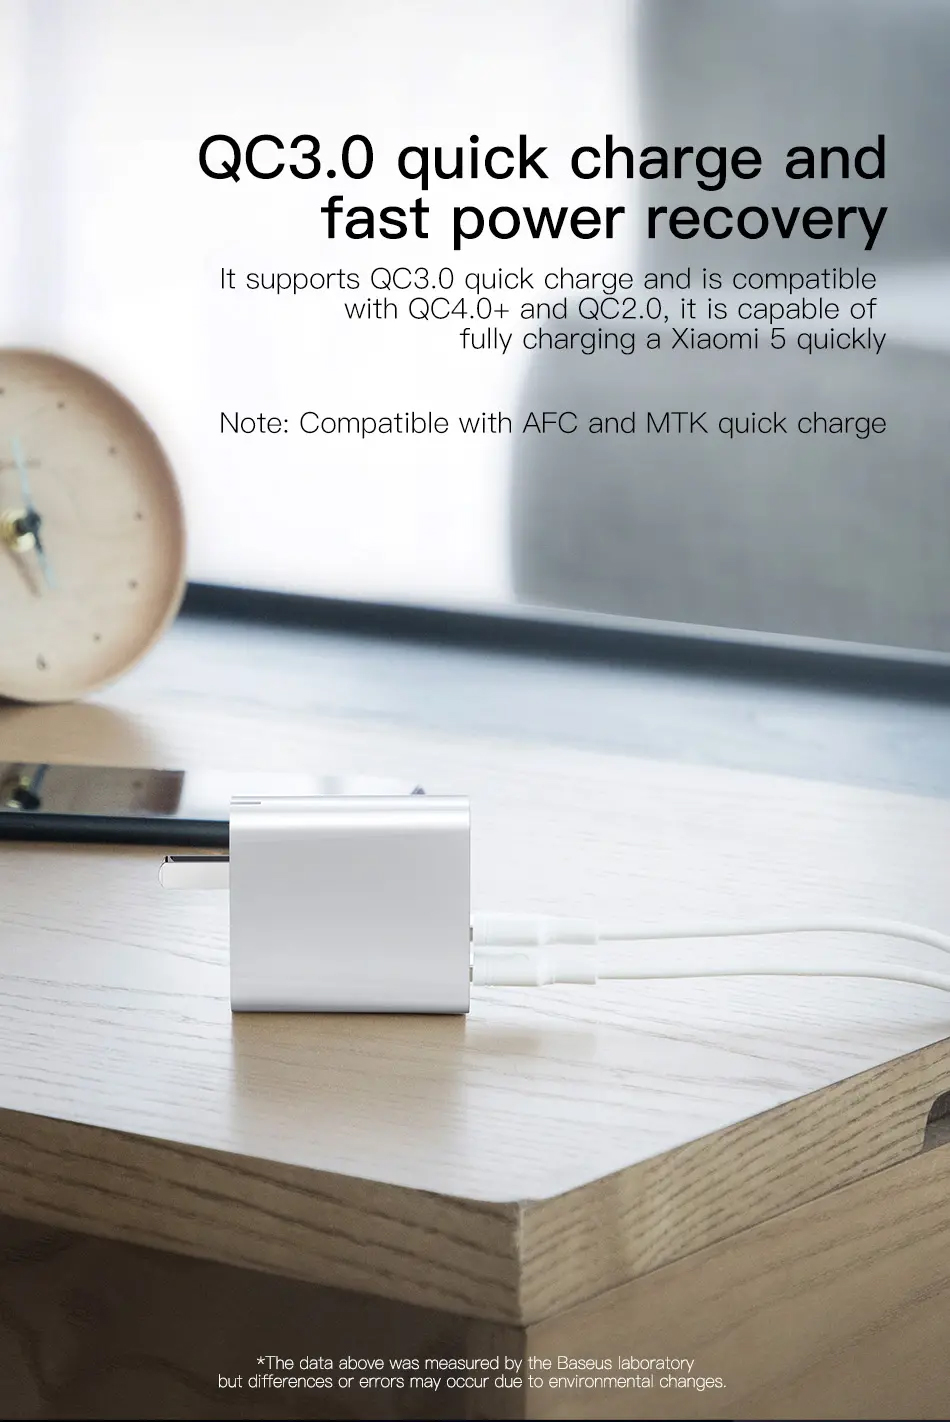 It supports QC3.O quick charge and is compatible with QC4.O+ and QC2.0, it is capable of fully charging a Xiaomi 5 quickly